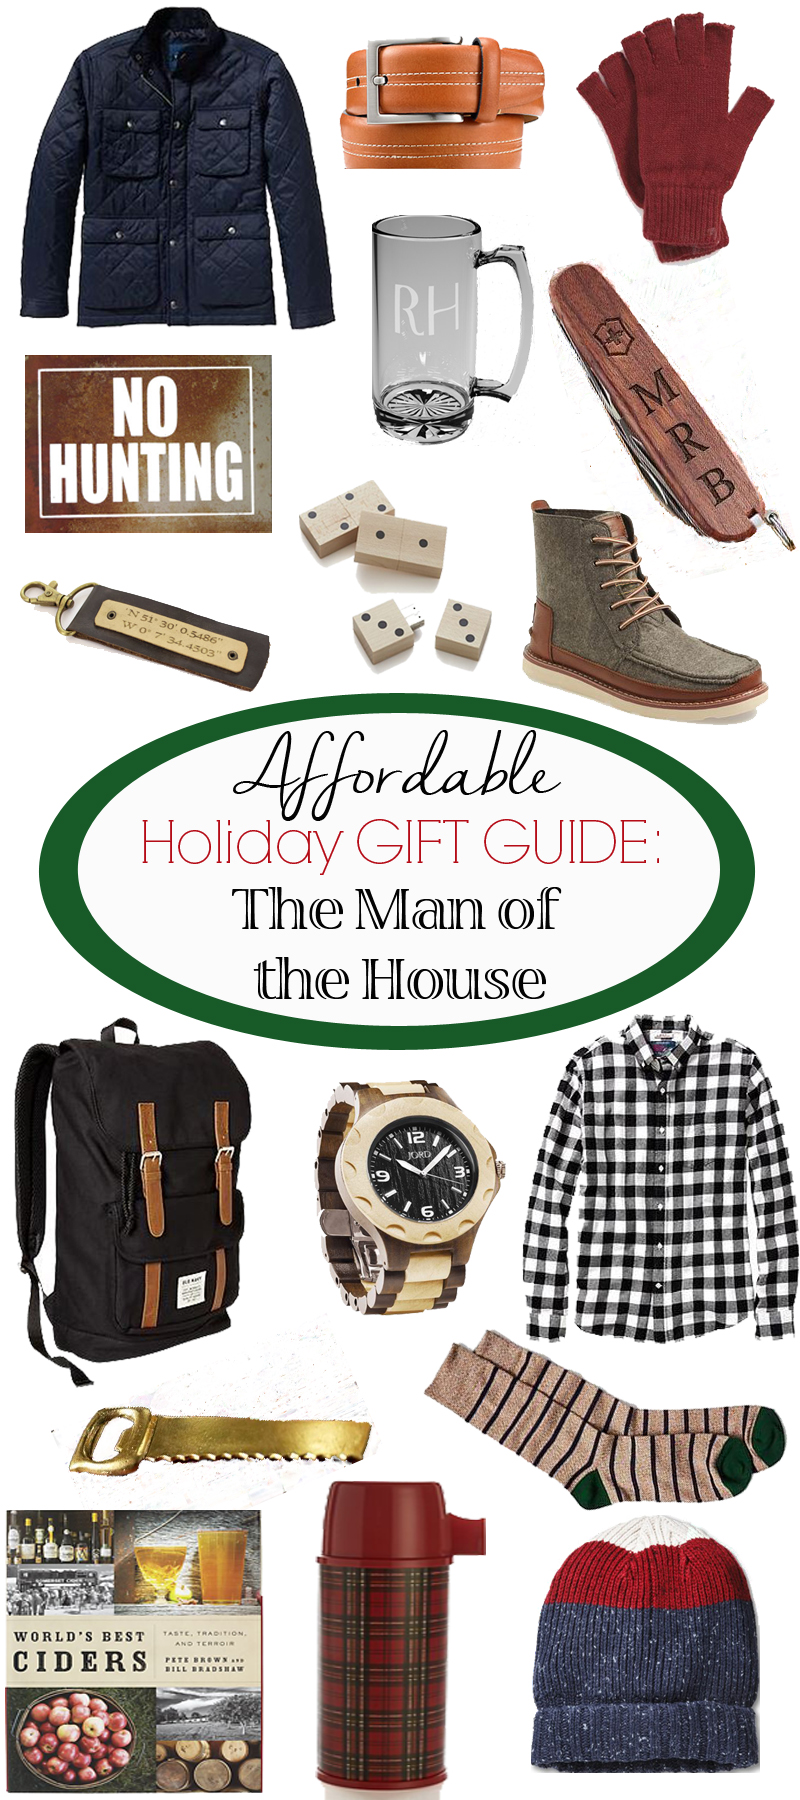 Affordable Gifts for the Man of the House